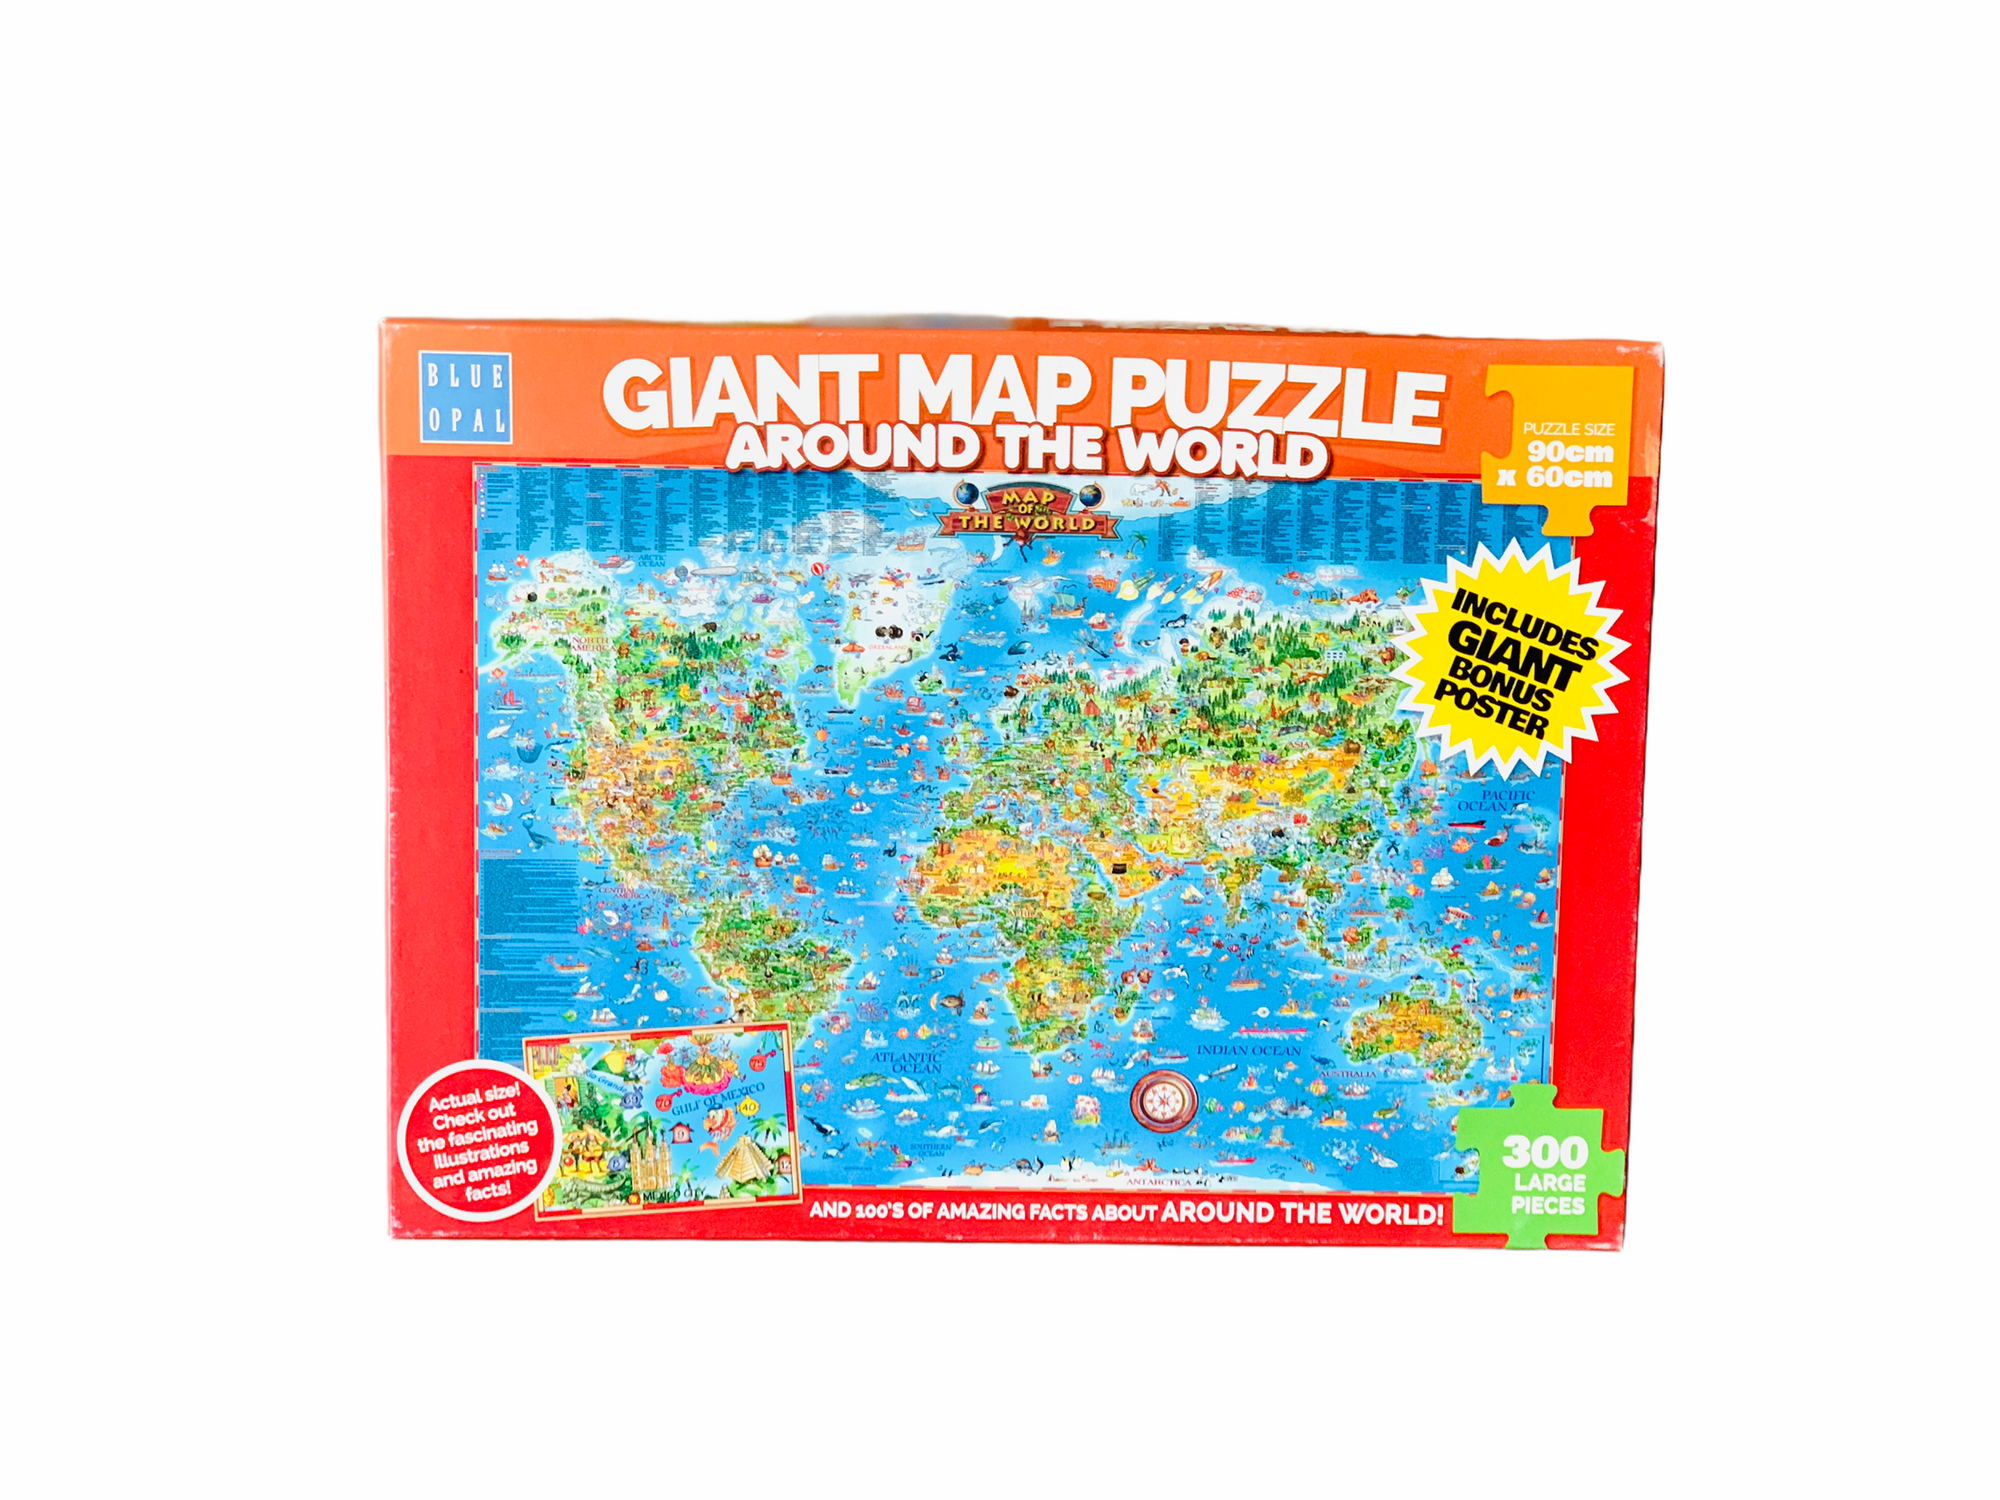 Around the World Puzzle - 300pc packaging box on white background